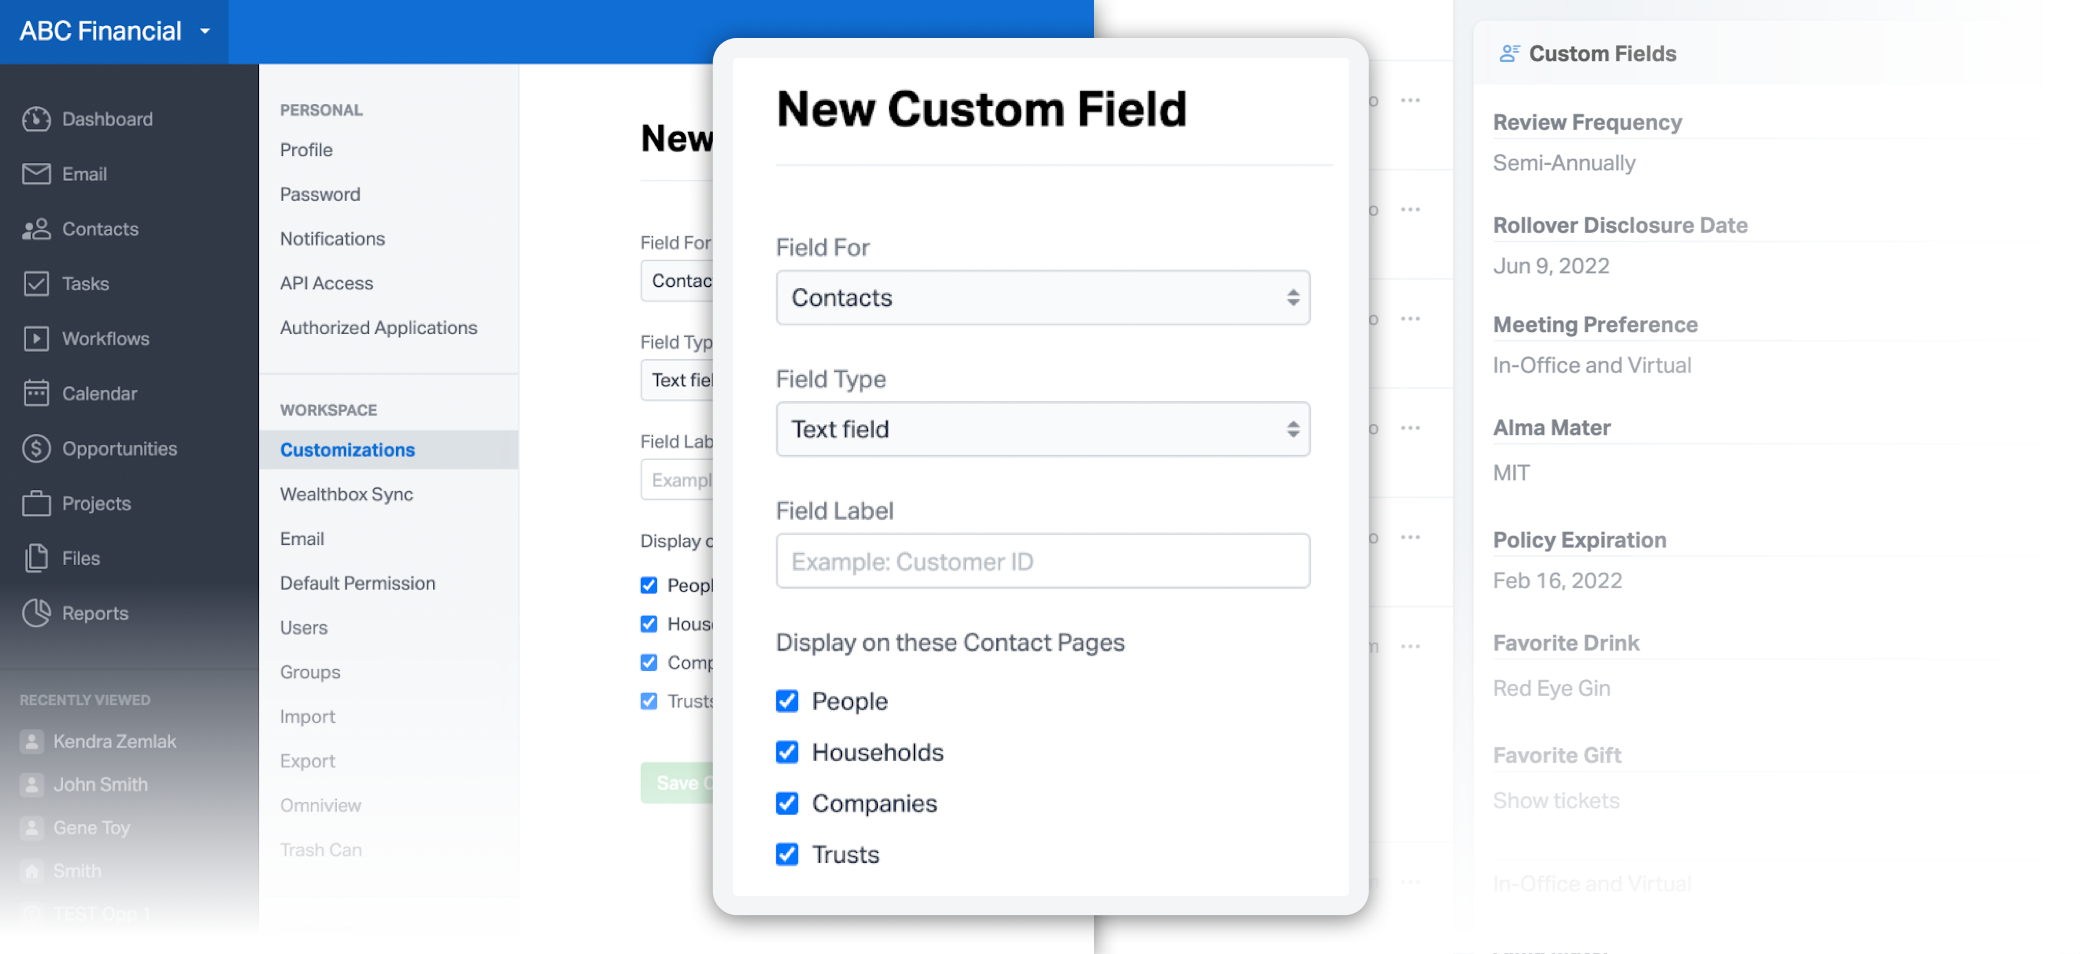 A Better Way to Manage Custom Fields for Contacts